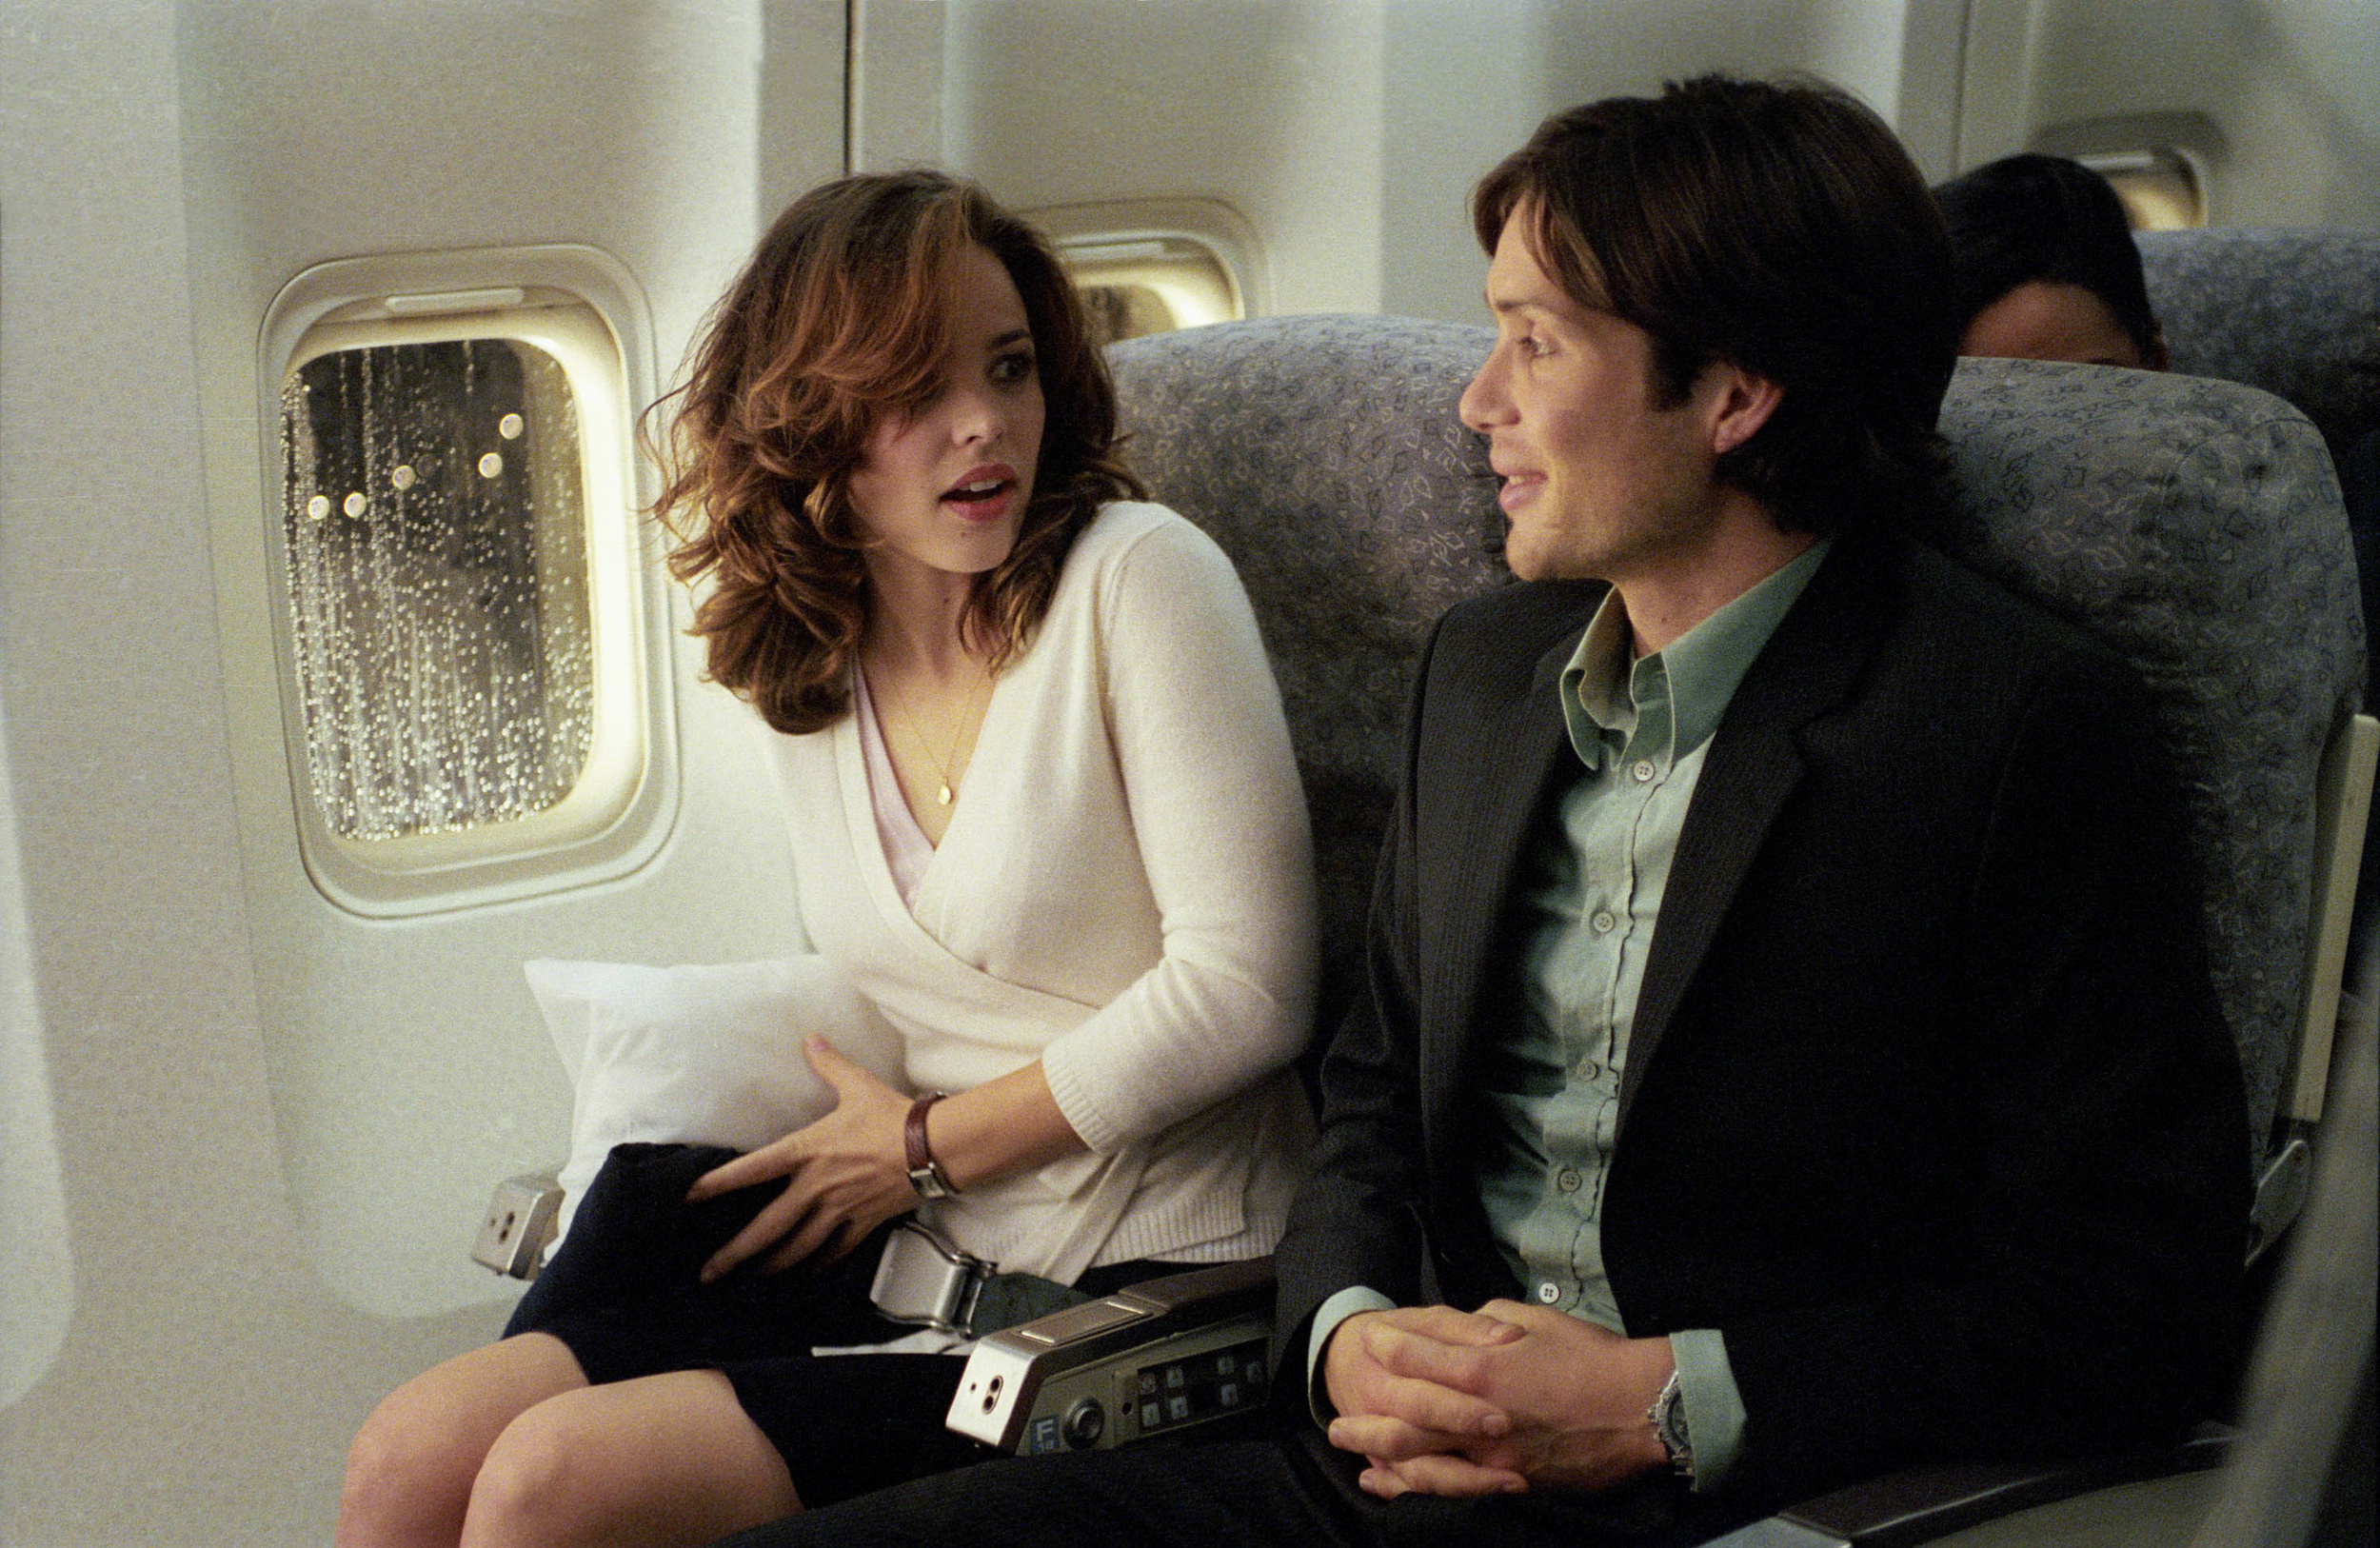 <p>“Nightmare at 20,000 Feet,” the TV episode, helped stoke the rise of the horror story set on a plane. “Red Eye” is a straight-up horror film, or maybe more of a thriller, directed by none other than Wes Craven. The horror master helmed a story where Rachel McAdams’ character finds herself sitting next to Cillian Murphy who, unsurprisingly, turns out to be a menacing man with sinister motives.</p><p>You may also like: <a href='https://www.yardbarker.com/entertainment/articles/20_facts_you_might_not_know_about_theres_something_about_mary_032024/s1__37717079'>20 facts you might not know about 'There's Something About Mary'</a></p>